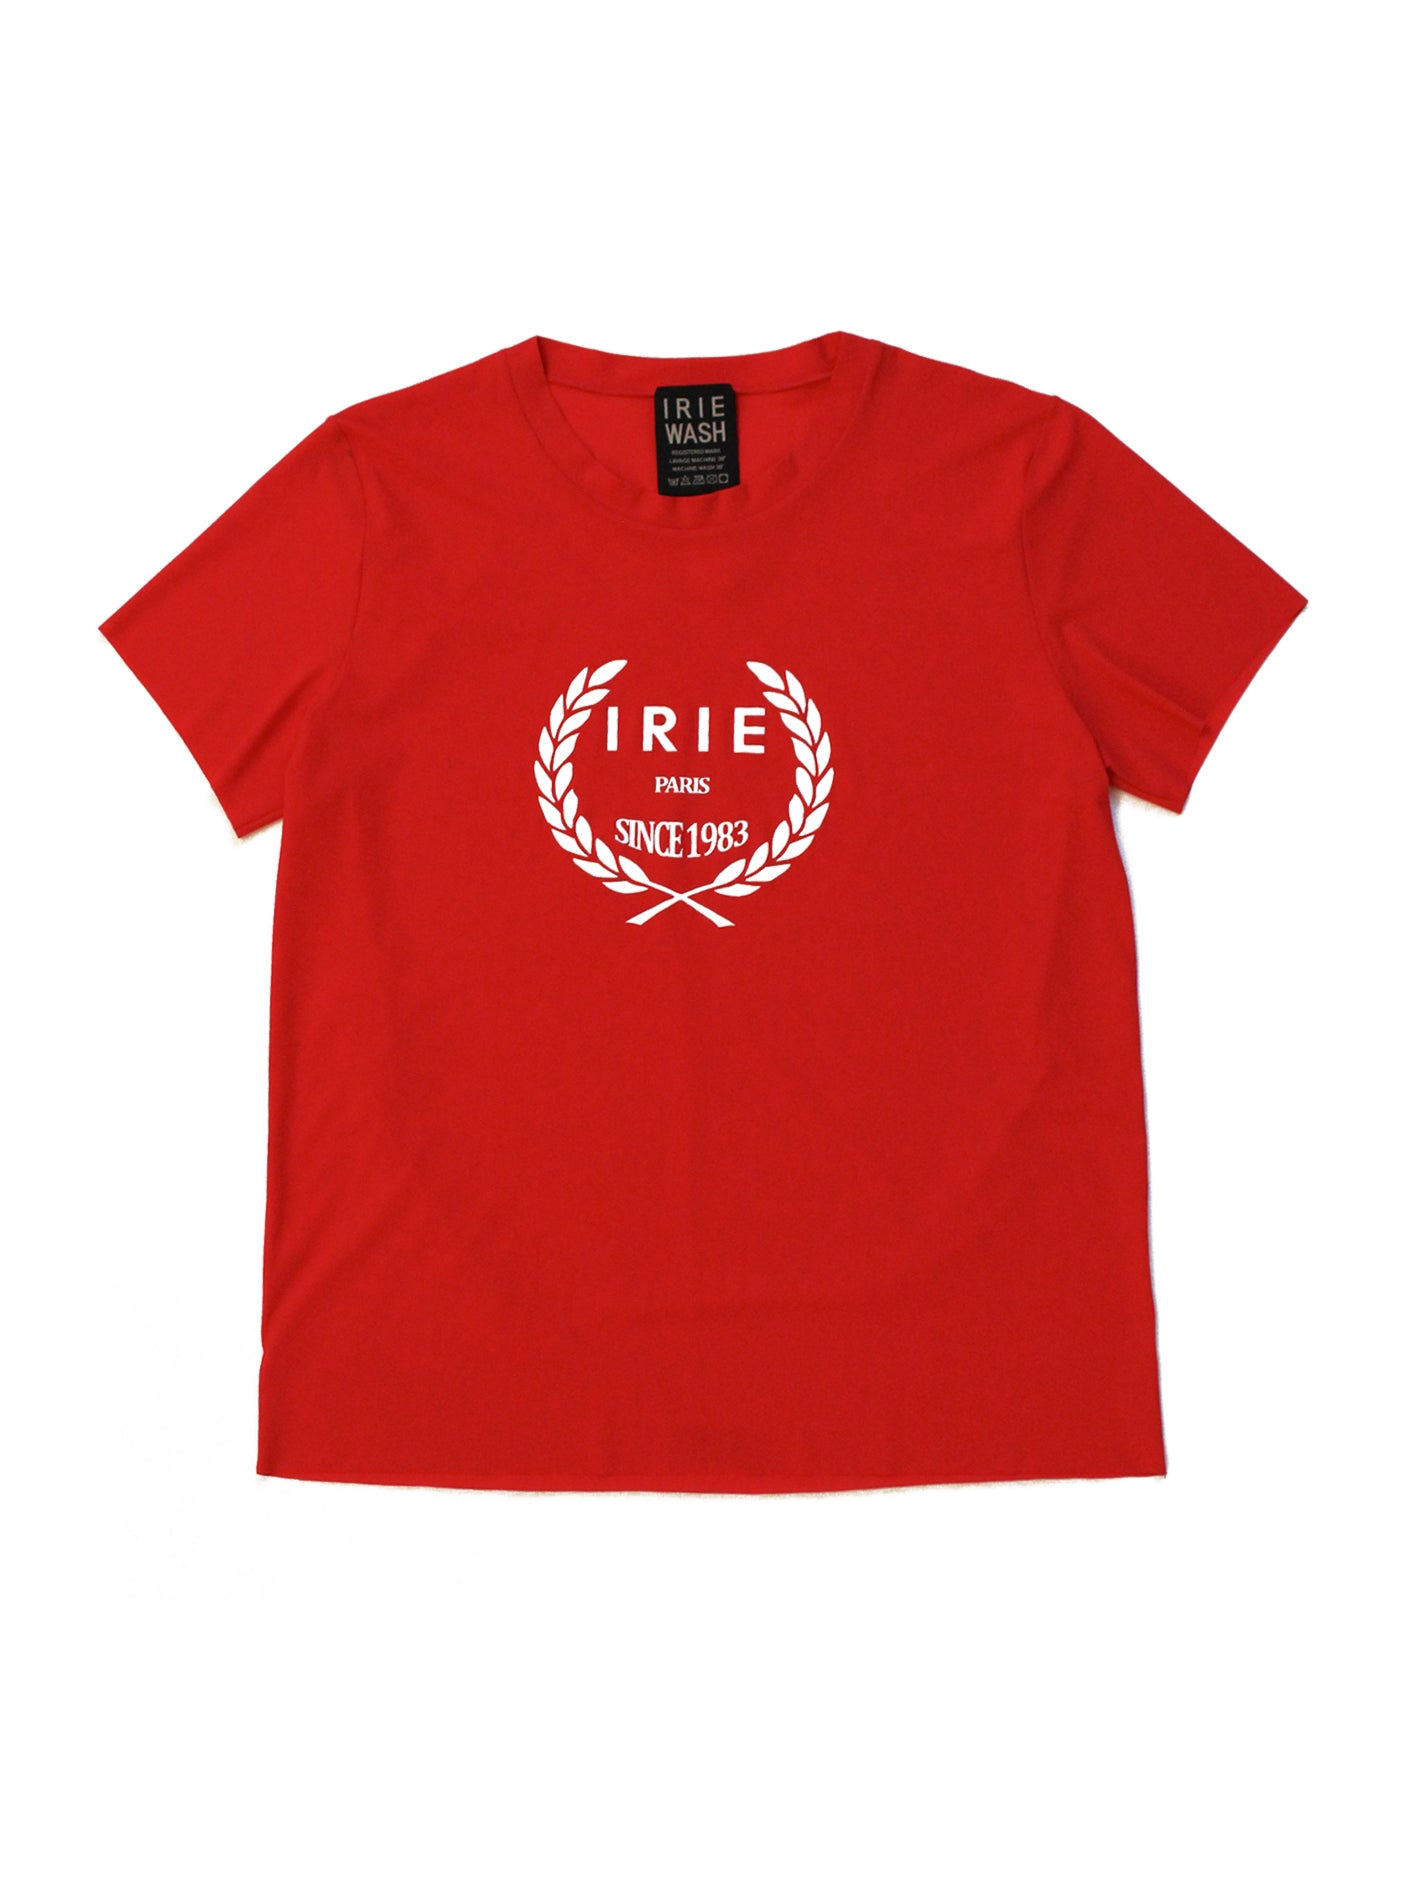 OLYMPIC T-SHIRT, Red